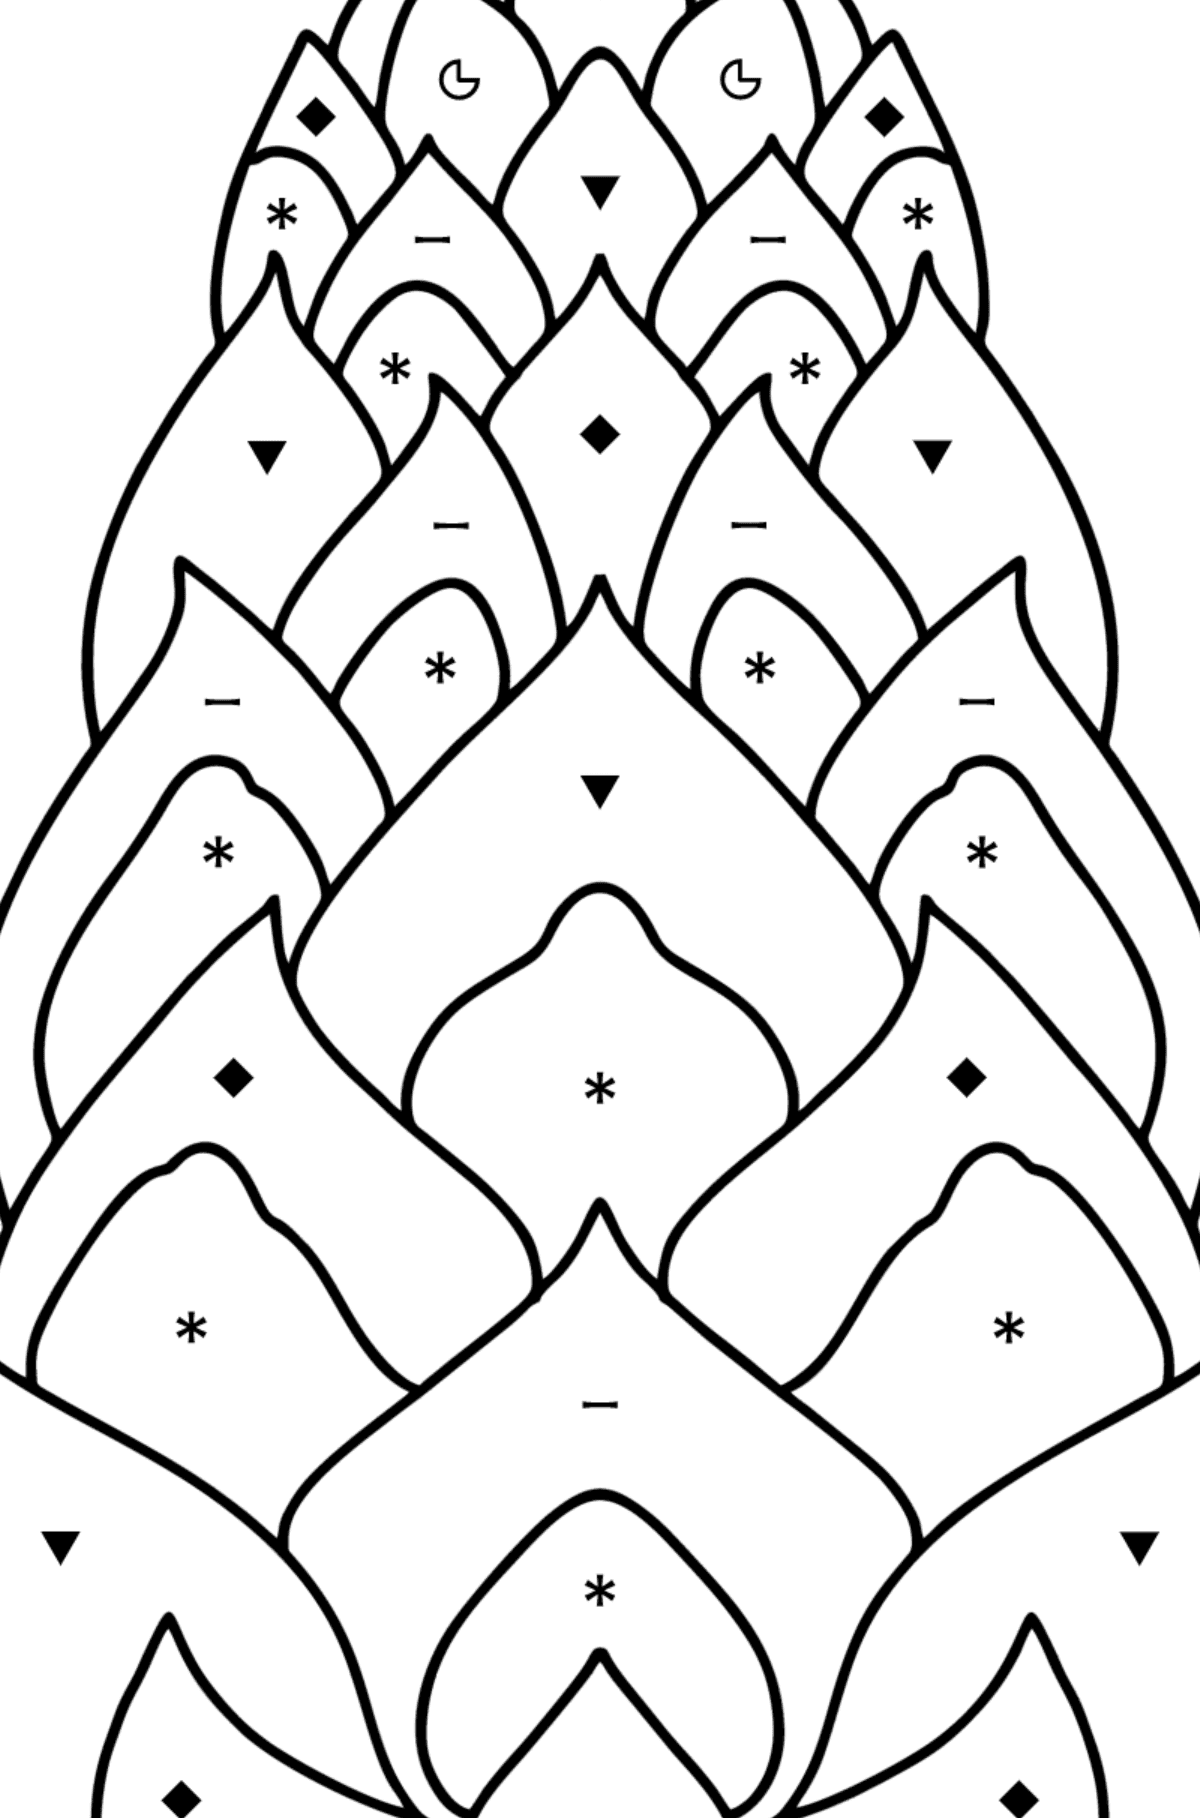 Pinecone from Lambert coloring page - Coloring by Symbols and Geometric Shapes for Kids